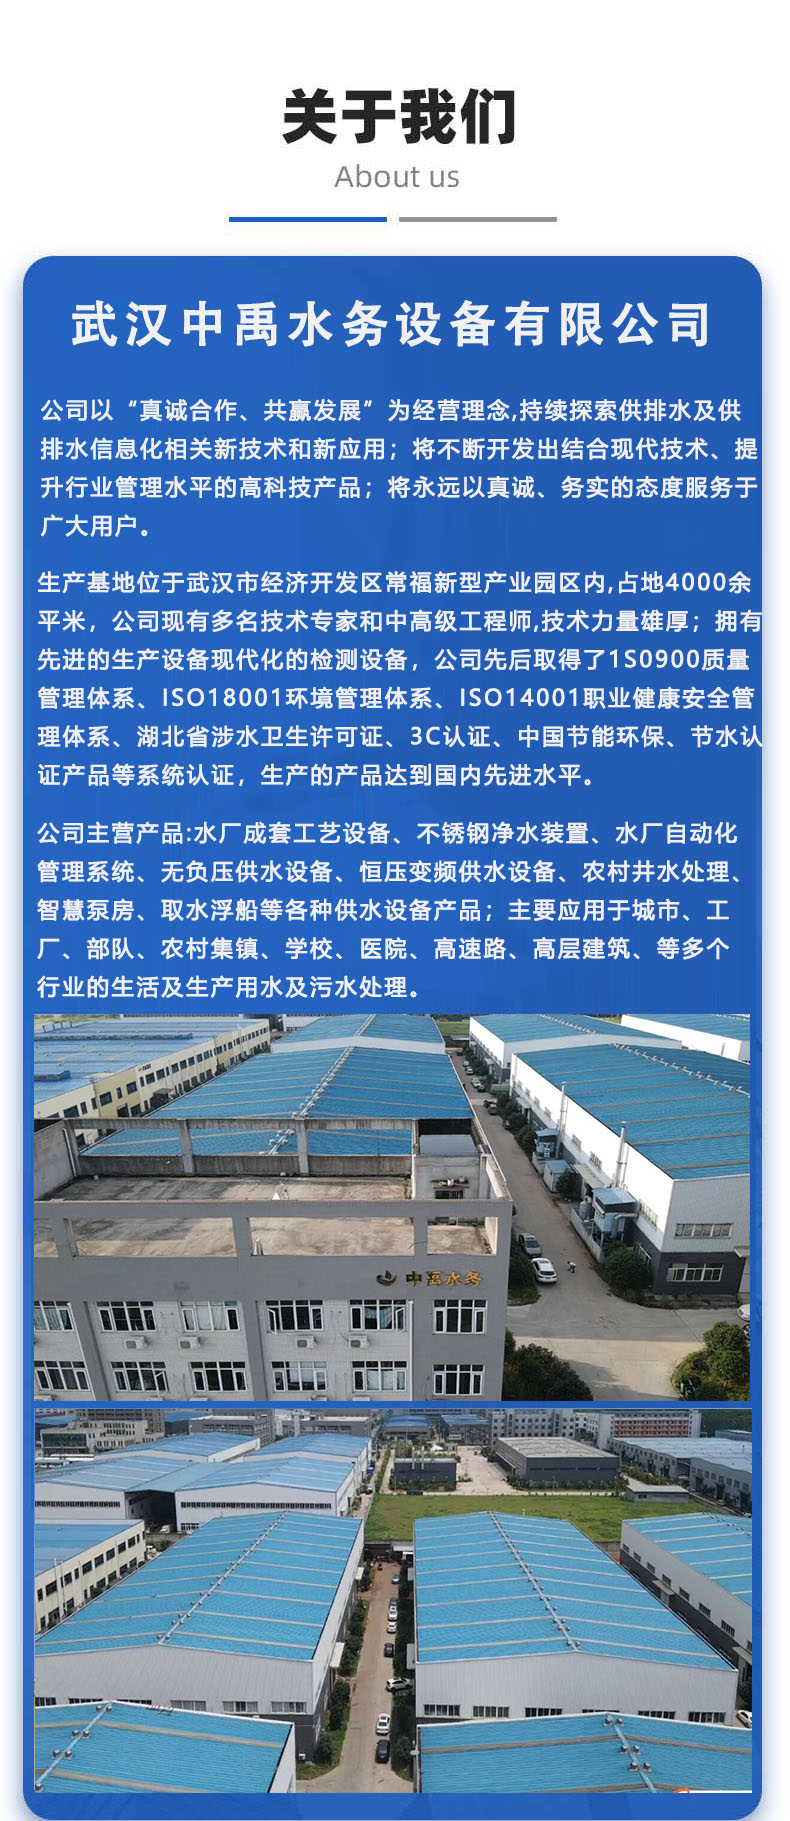 Rural Drinking Water Purification Equipment in Yushui Rural Safe Drinking Water Project Domestic Drinking Water Filtering Equipment